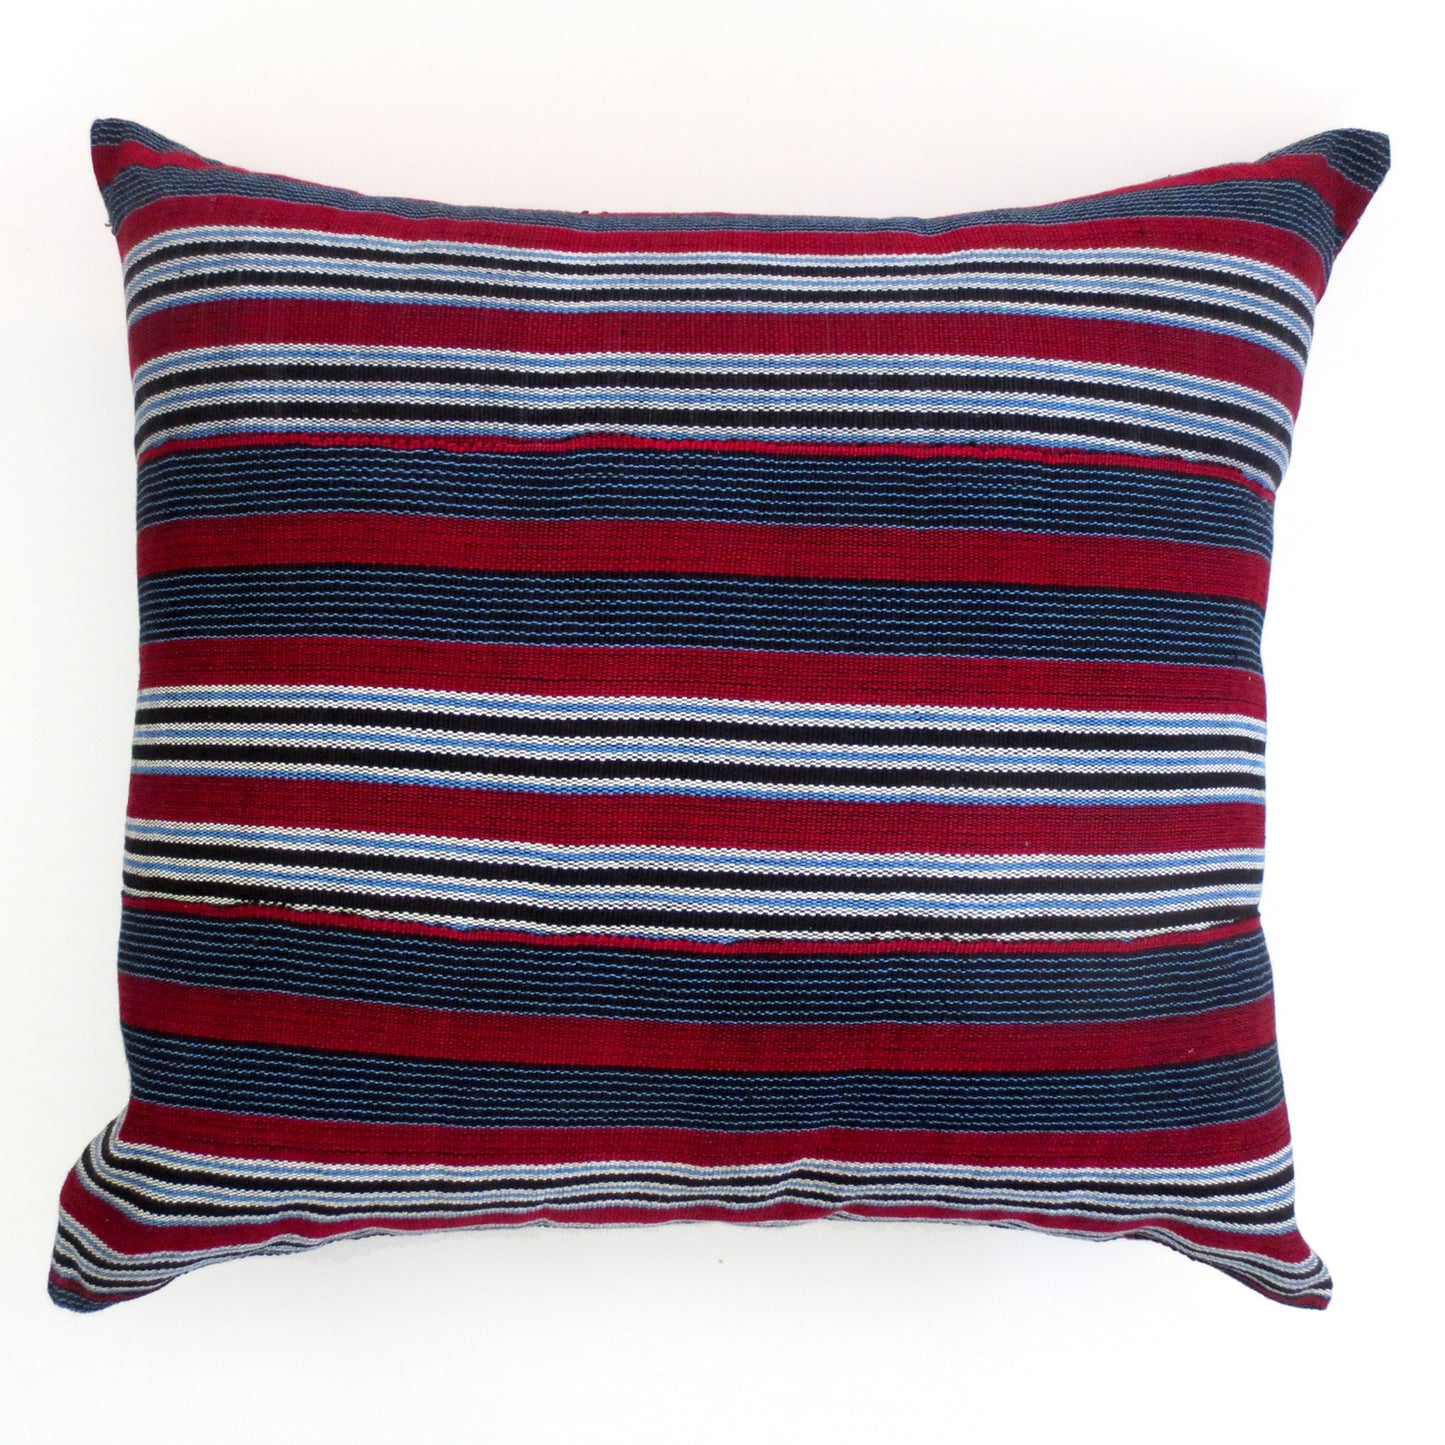 20"x20" striped pillow cover. Gray, navy and red tones. noraokafor